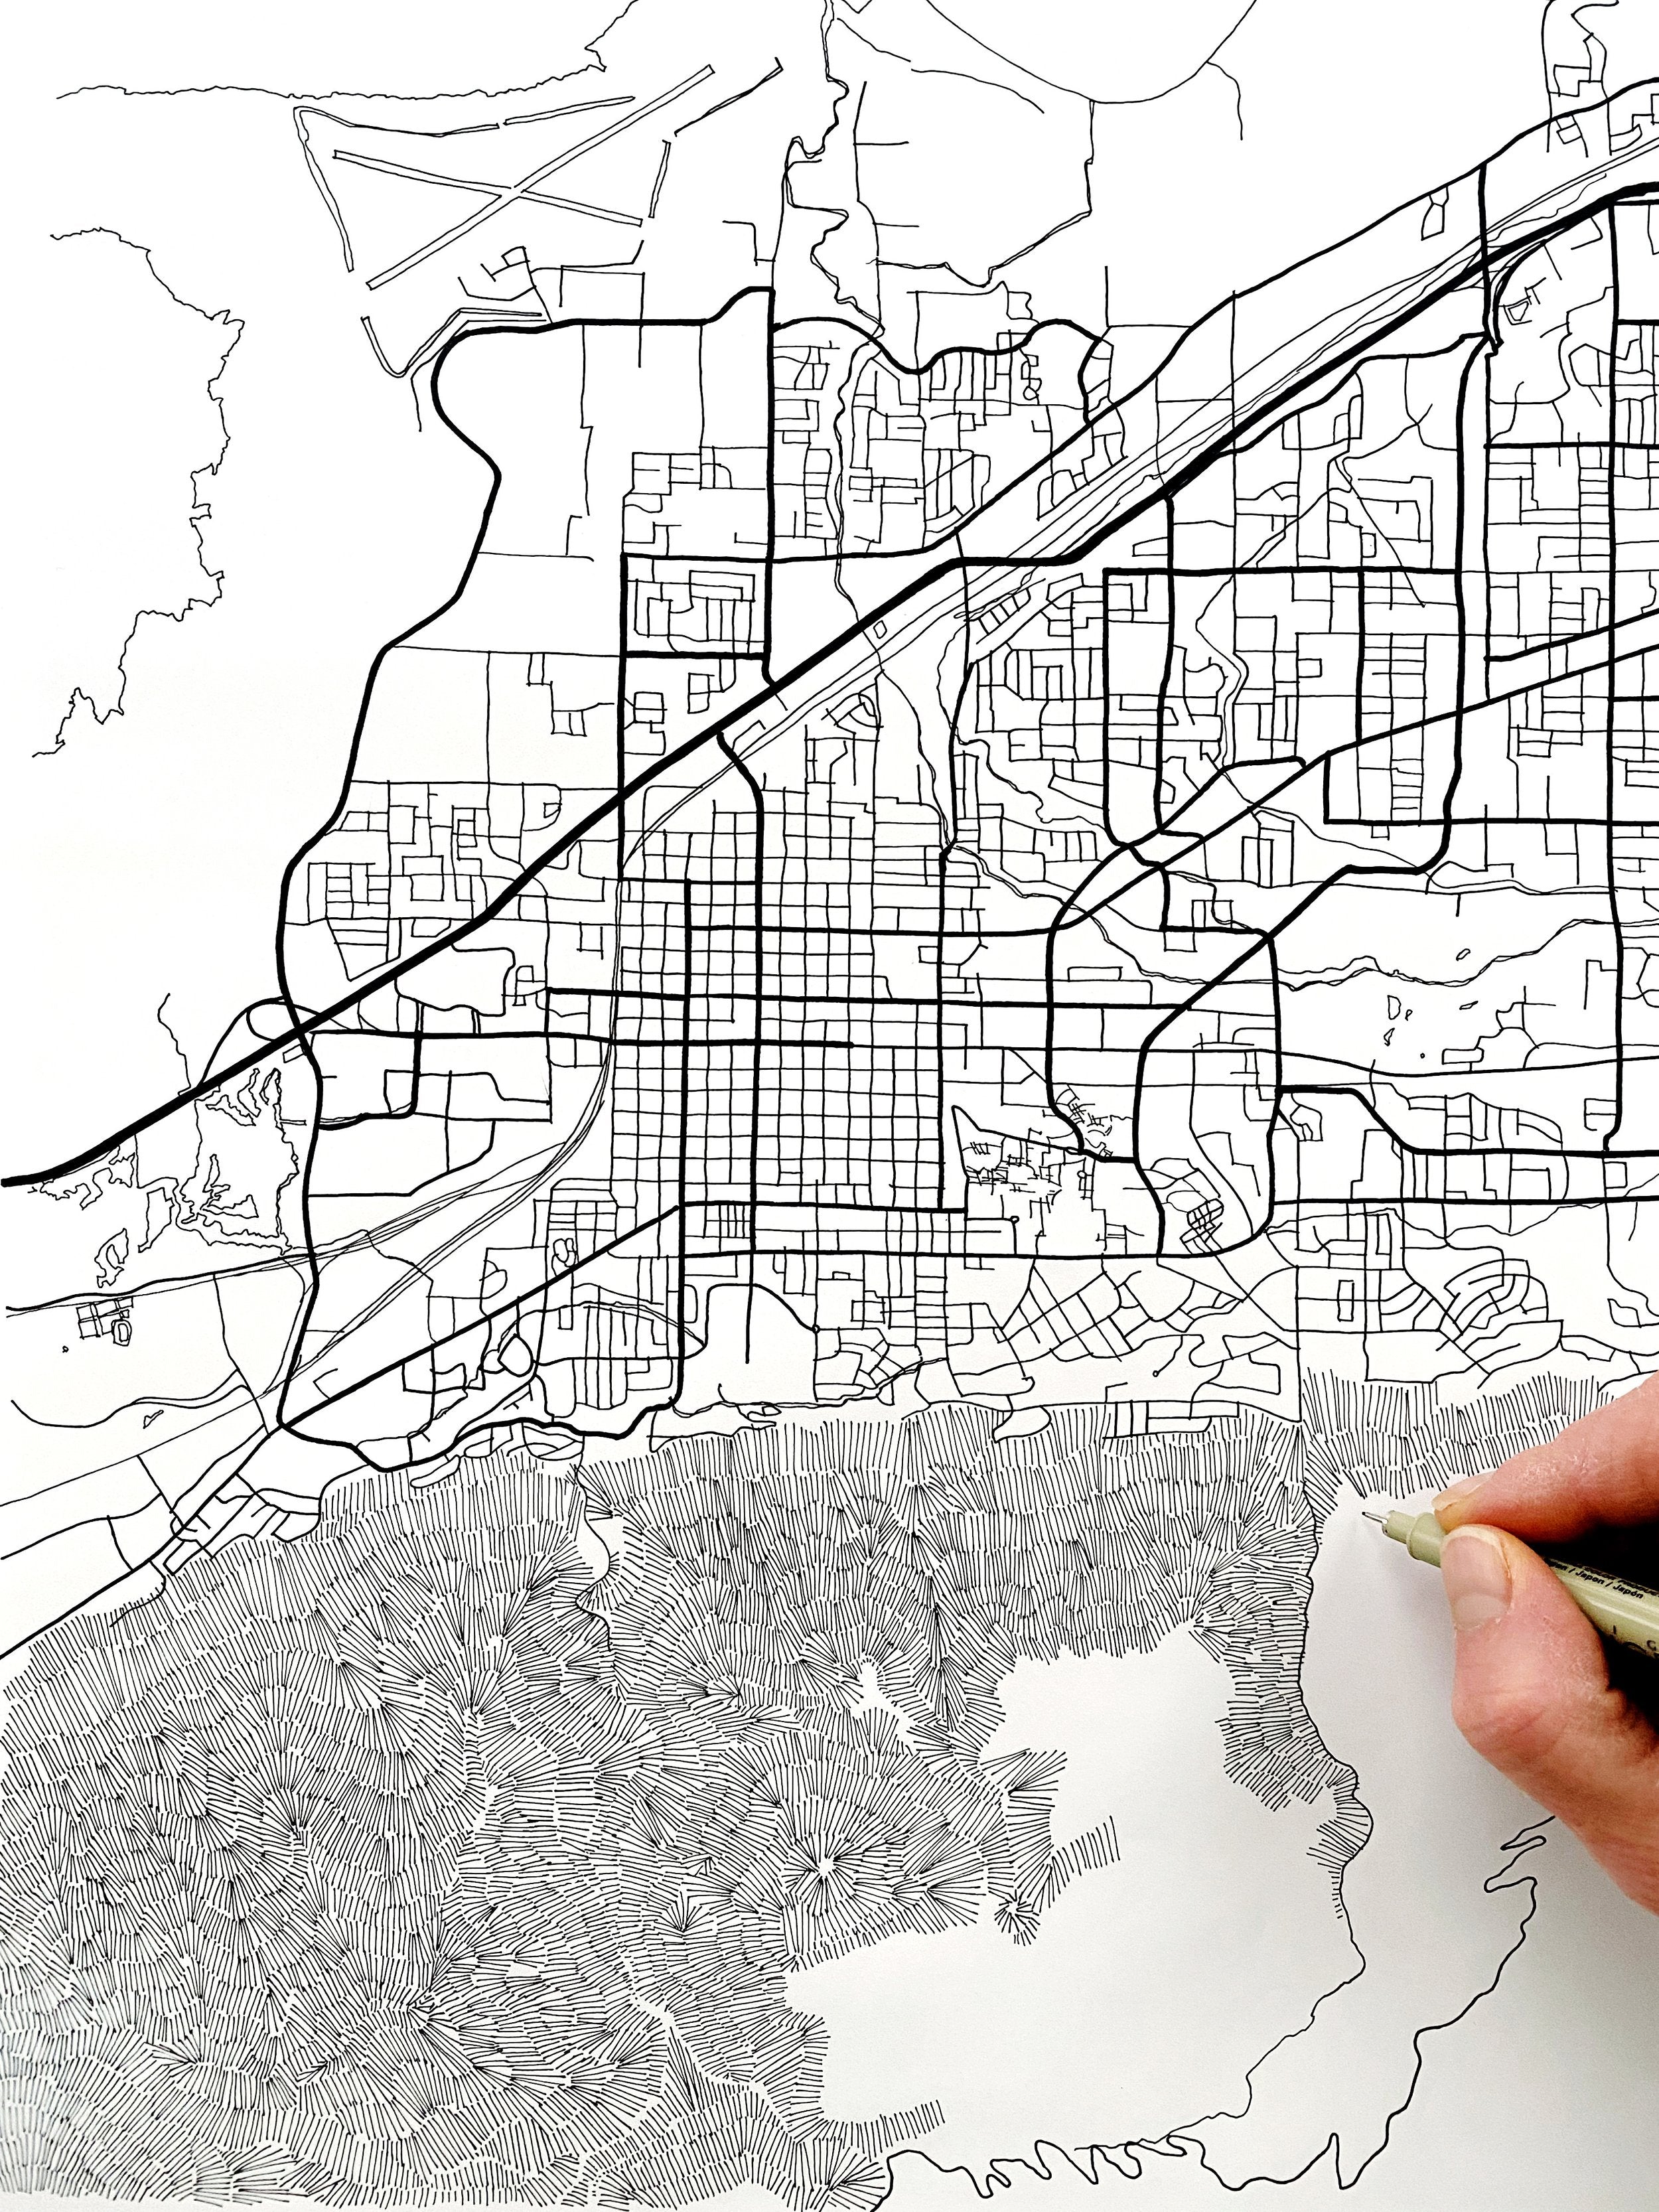 PROVO Topographical City Map Drawing: PRINT